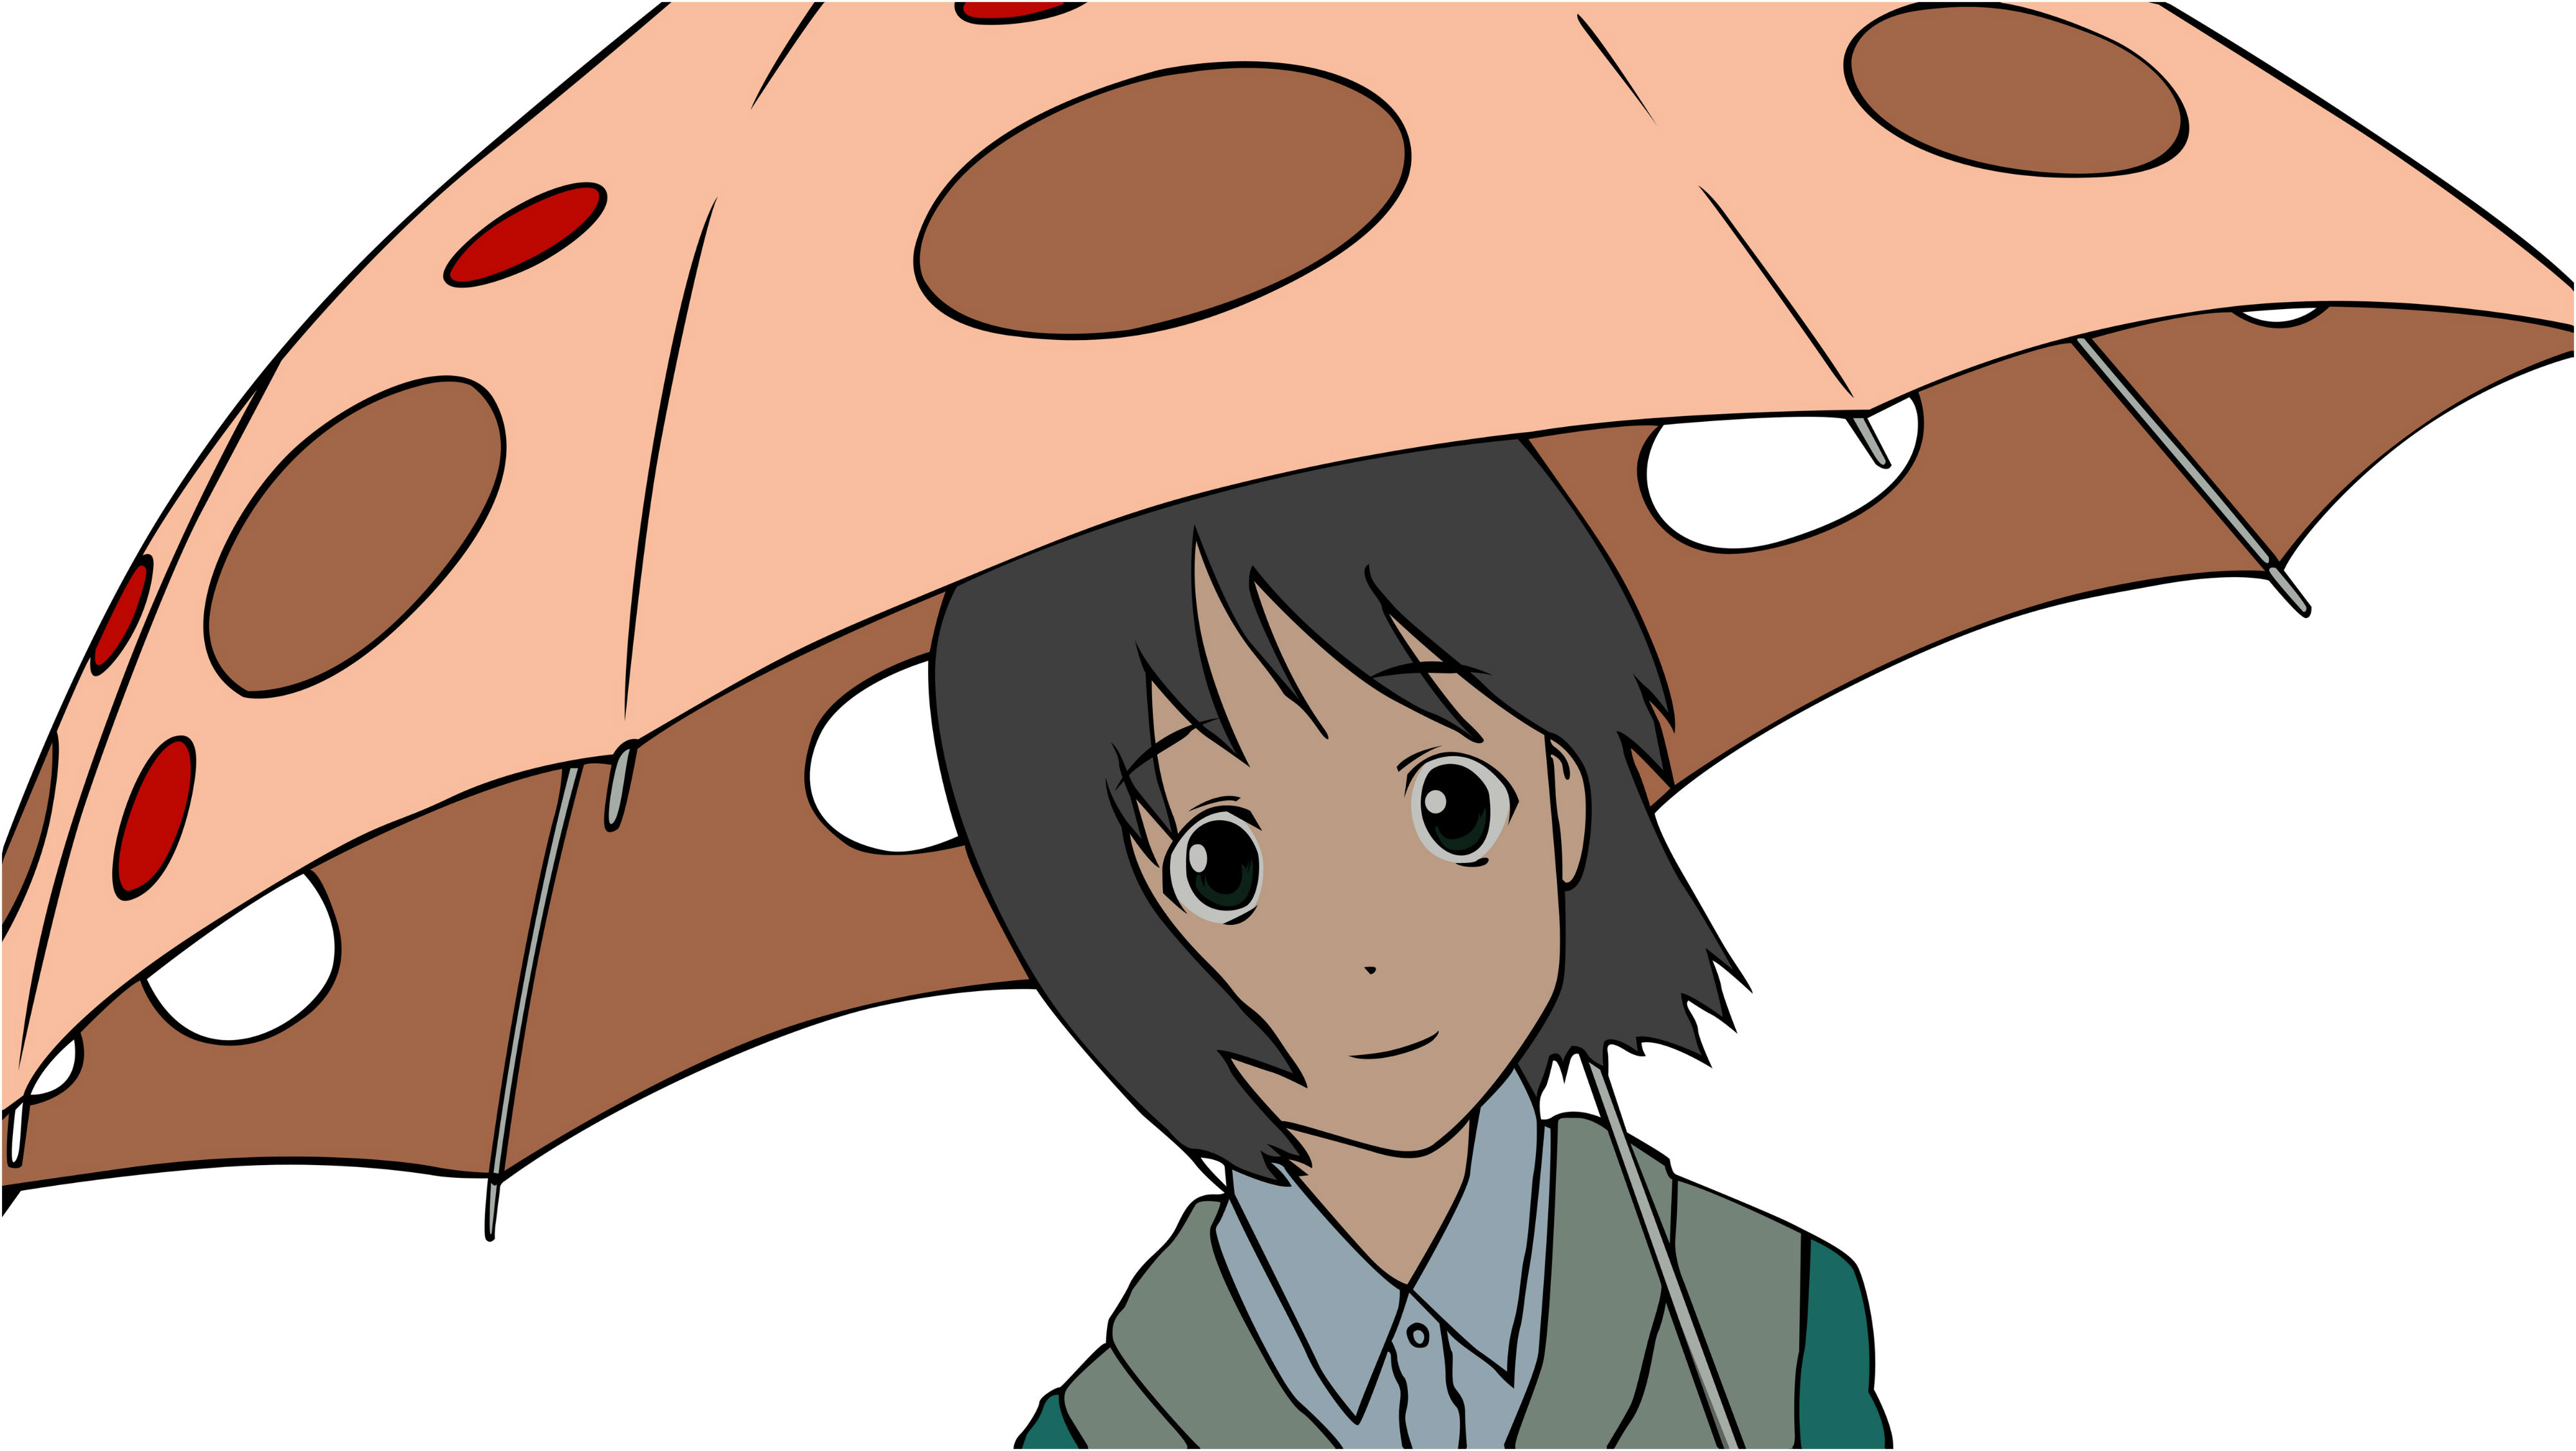 welcome to the nhk wallpaper,cartoon,anime,illustration,clip art,smile